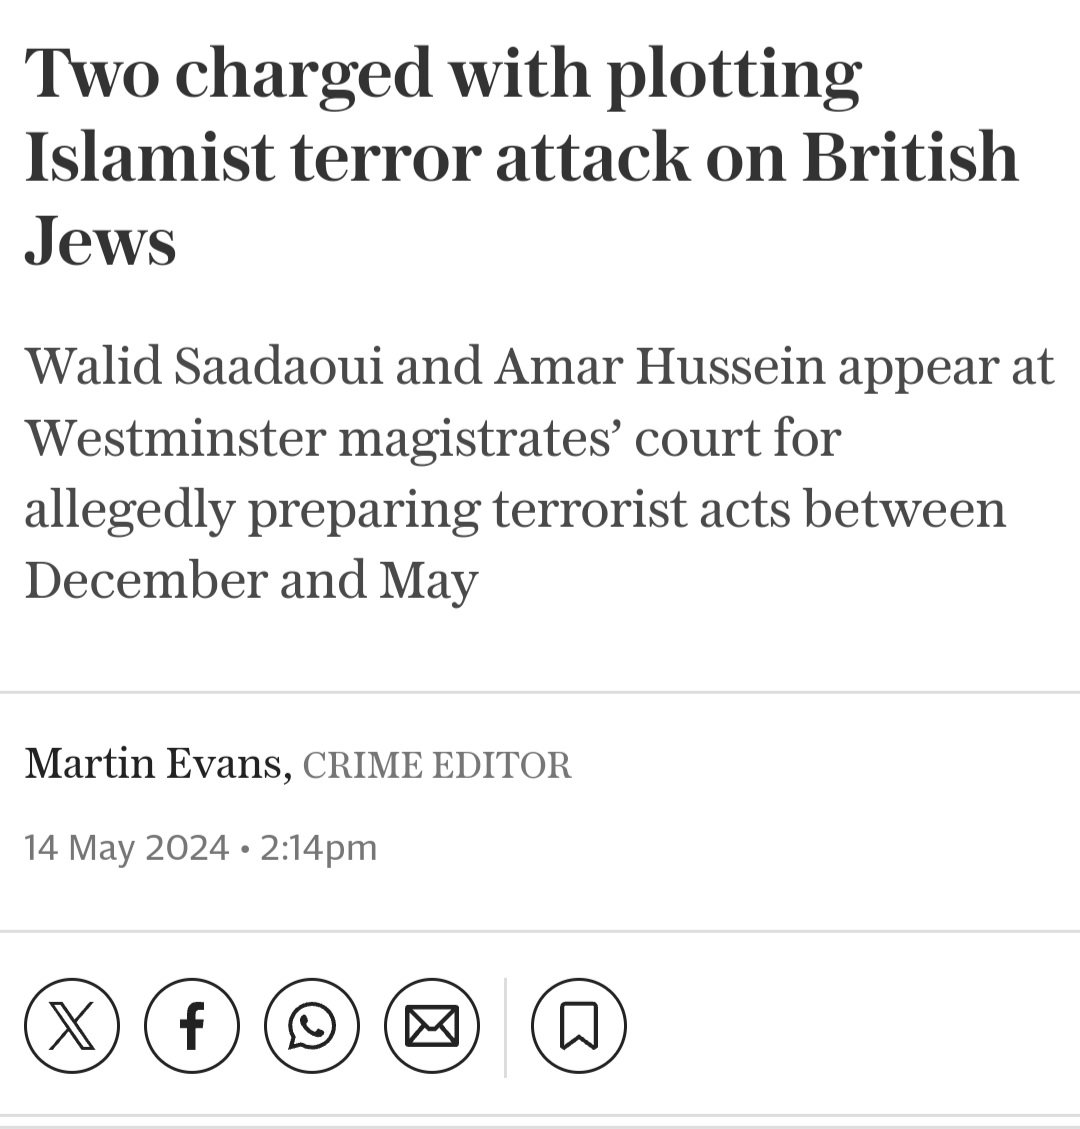 Walid Saadaoui, 36, and Amar Hussein, 50, have appeared in court accused of plotting to carry out an Islamic State-inspired marauding gun attack against the Jewish community in the north-west of England. They were also allegedly planning to target police officers and members of